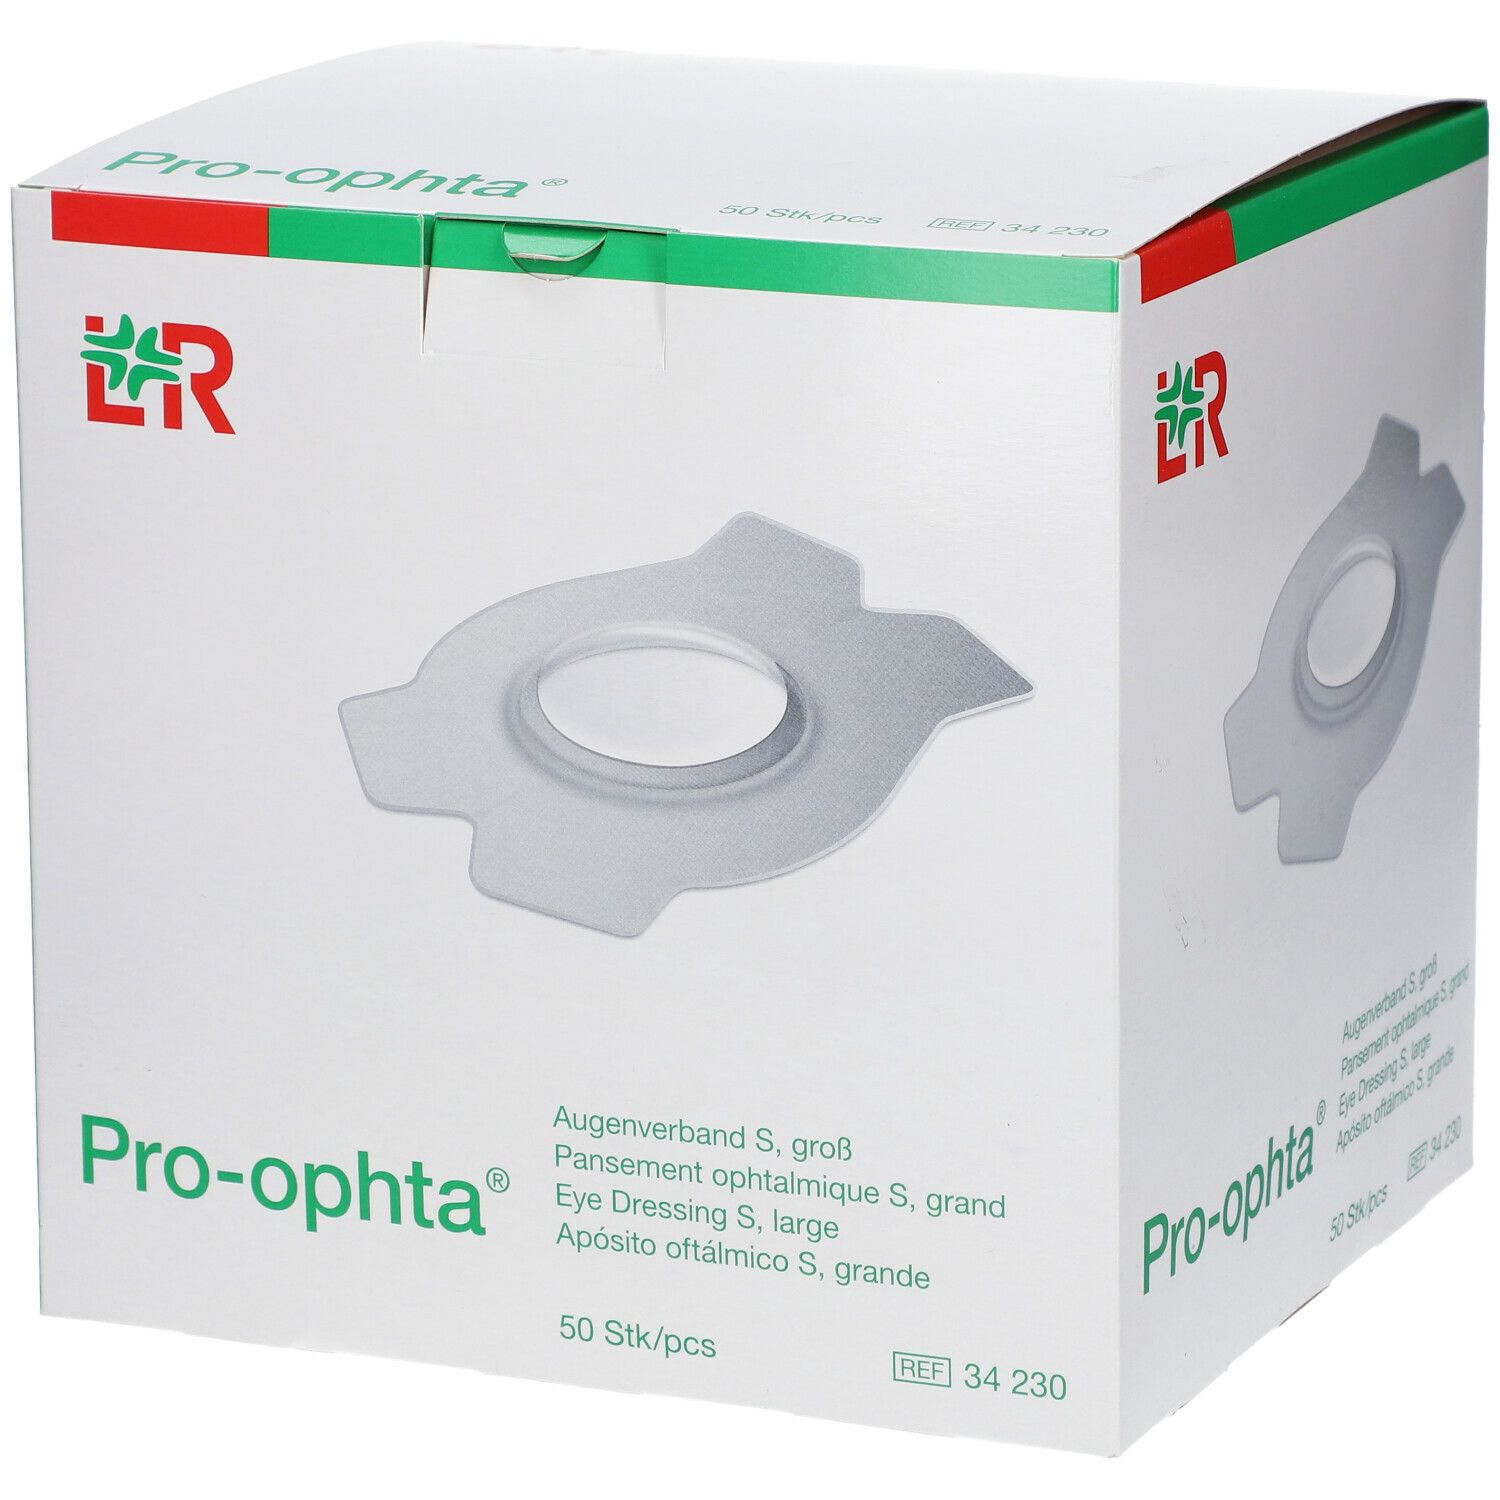 Pro-ophta® Pansement oculaire S grand